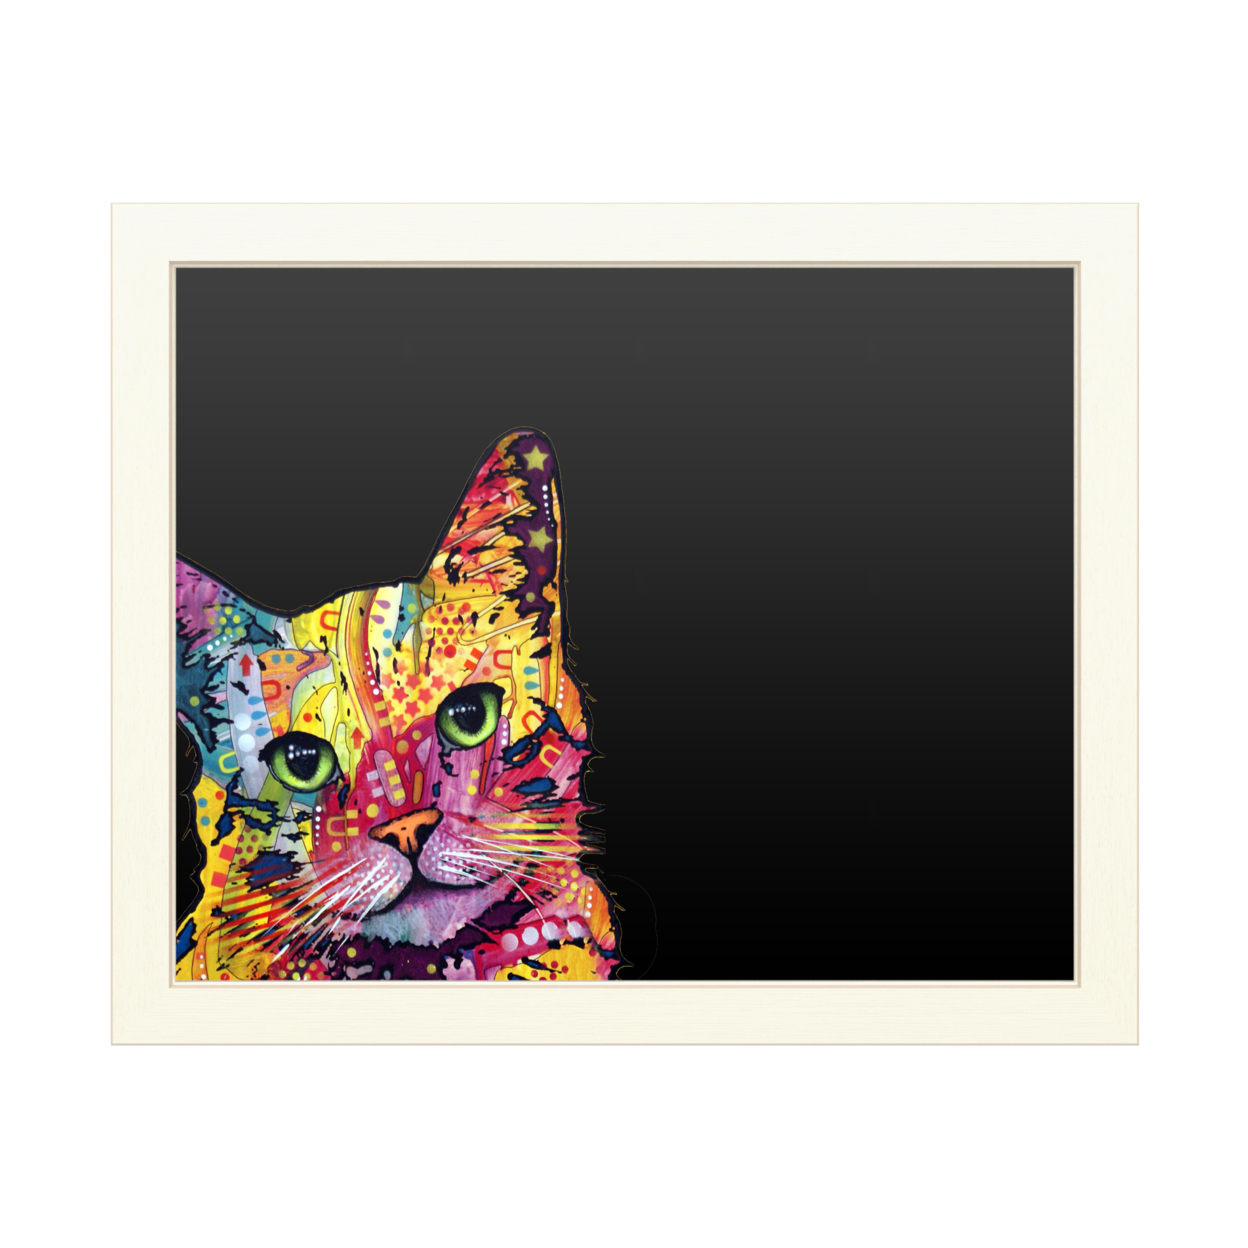 16 X 20 Chalk Board With Printed Artwork - Dean Russo Tilt Cat White Board - Ready To Hang Chalkboard